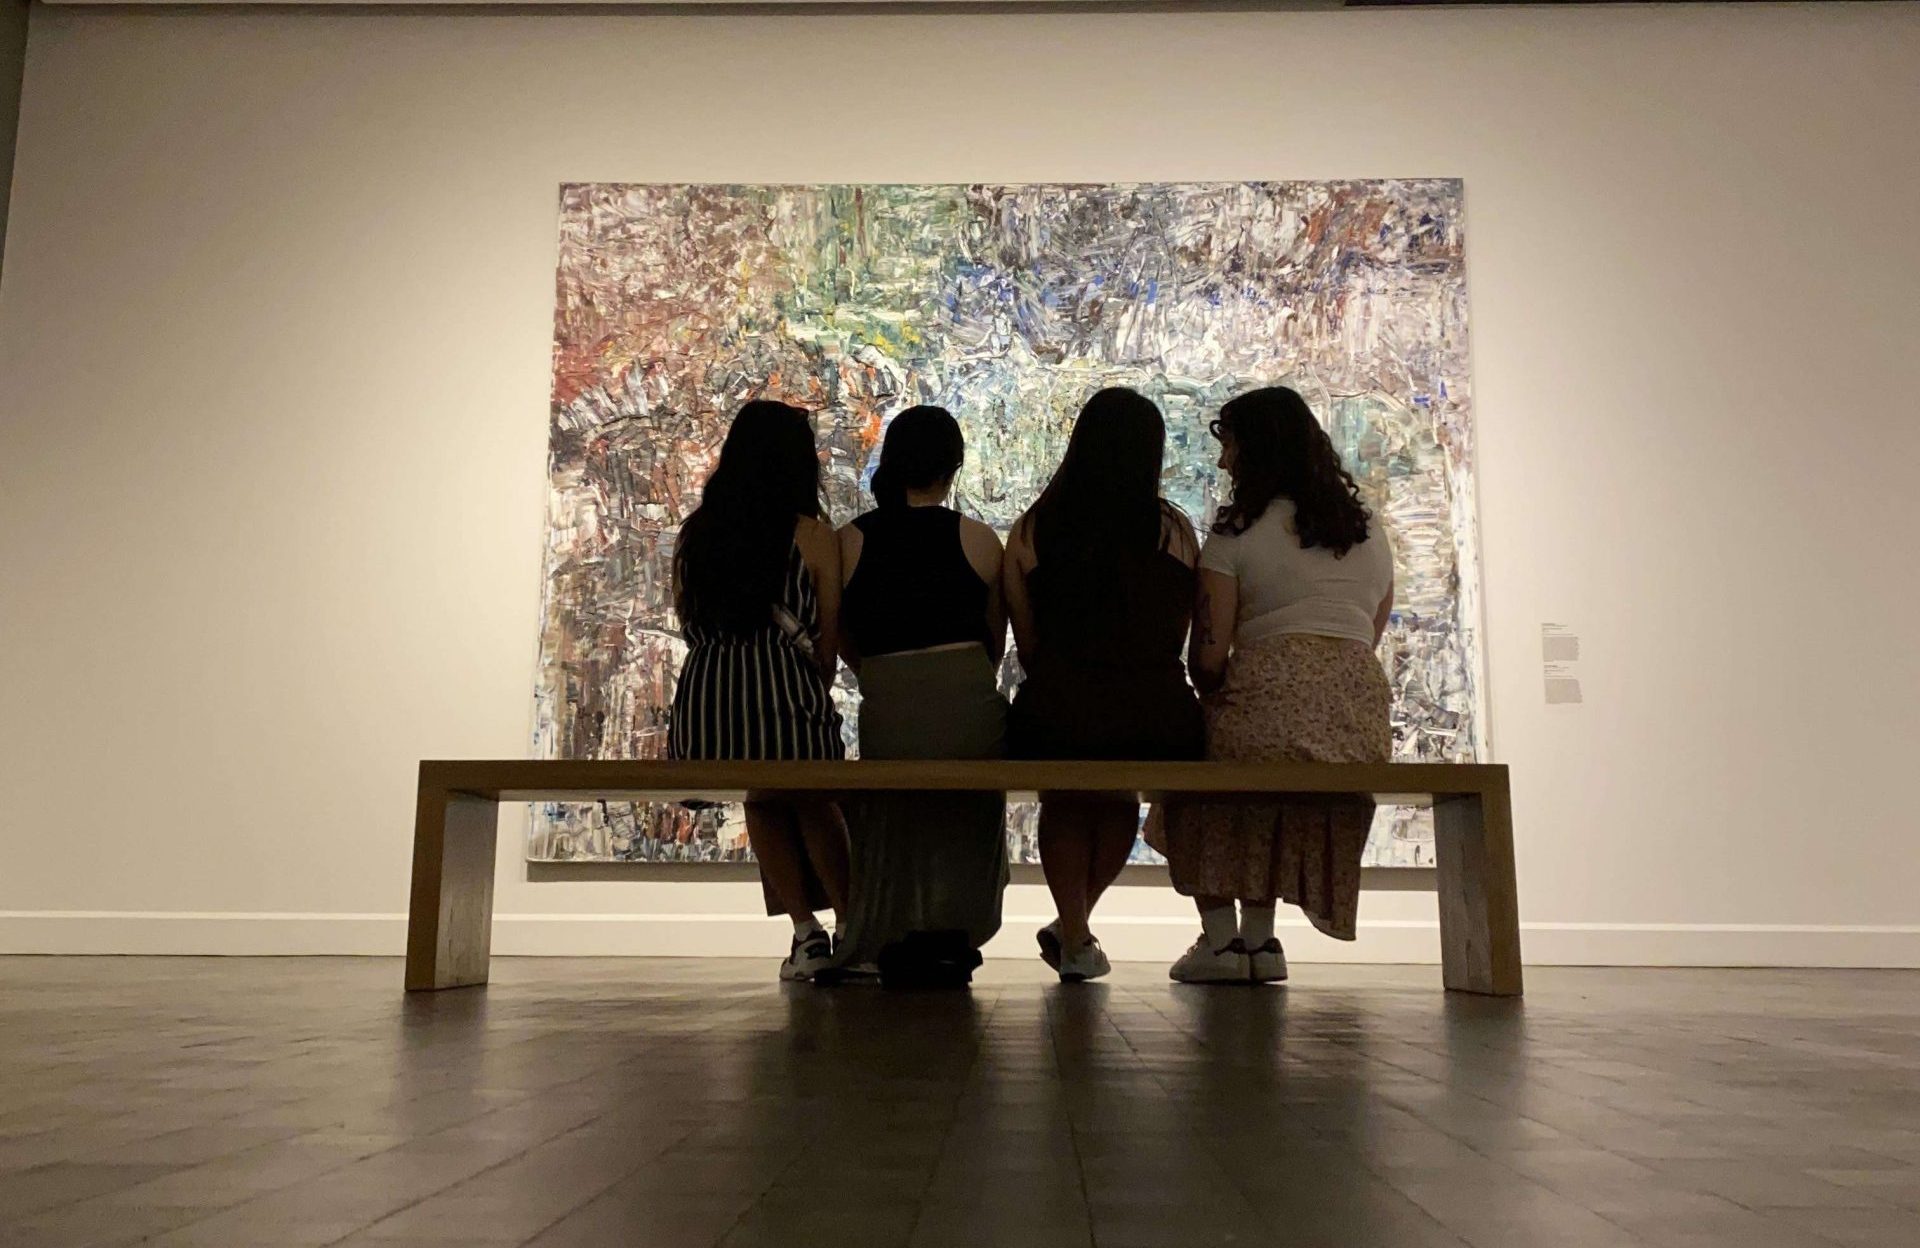 Four people at an art gallery. Photo by Angie Lu.